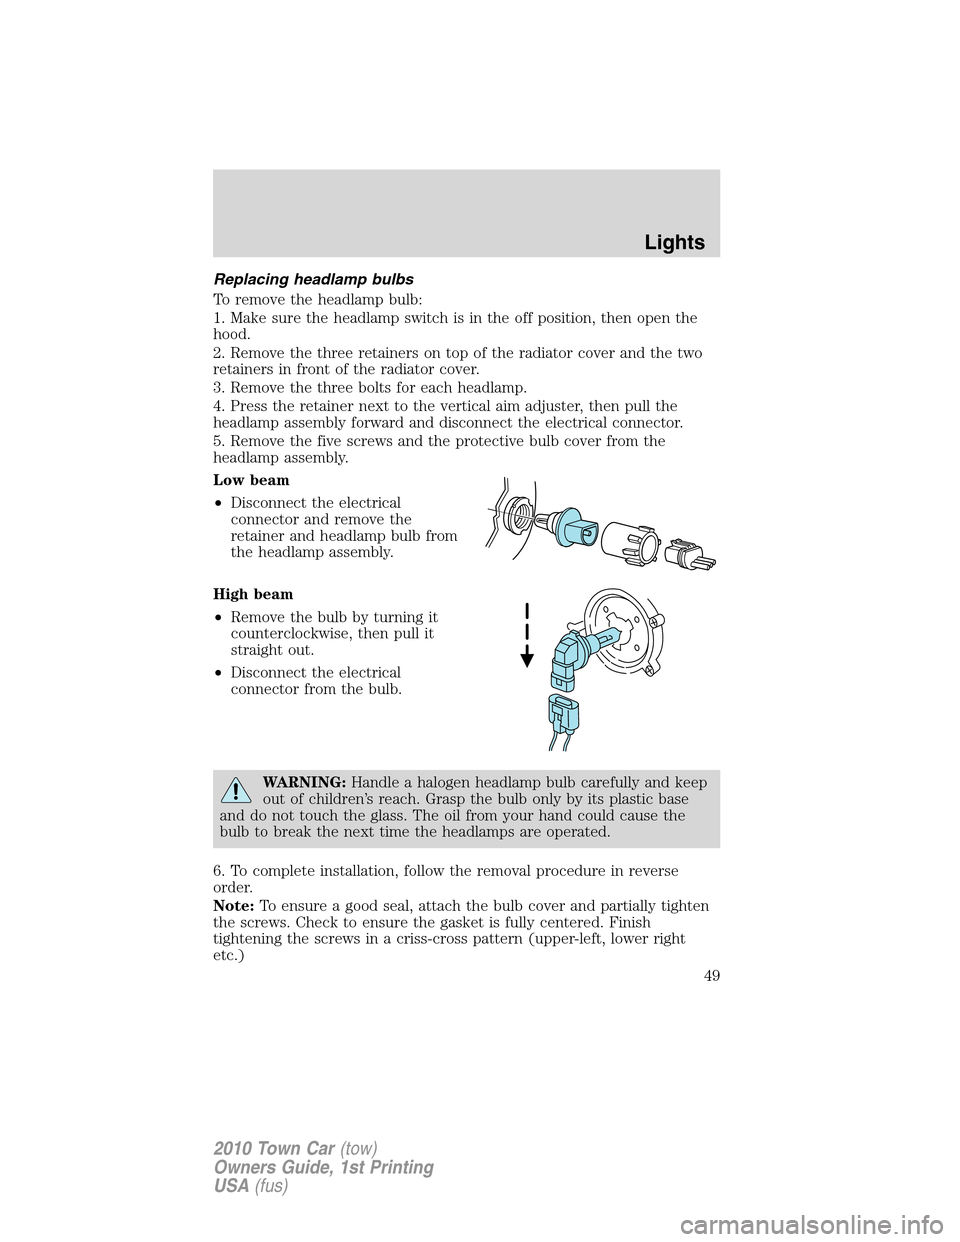 LINCOLN TOWN CAR 2010 Service Manual Replacing headlamp bulbs
To remove the headlamp bulb:
1. Make sure the headlamp switch is in the off position, then open the
hood.
2. Remove the three retainers on top of the radiator cover and the tw